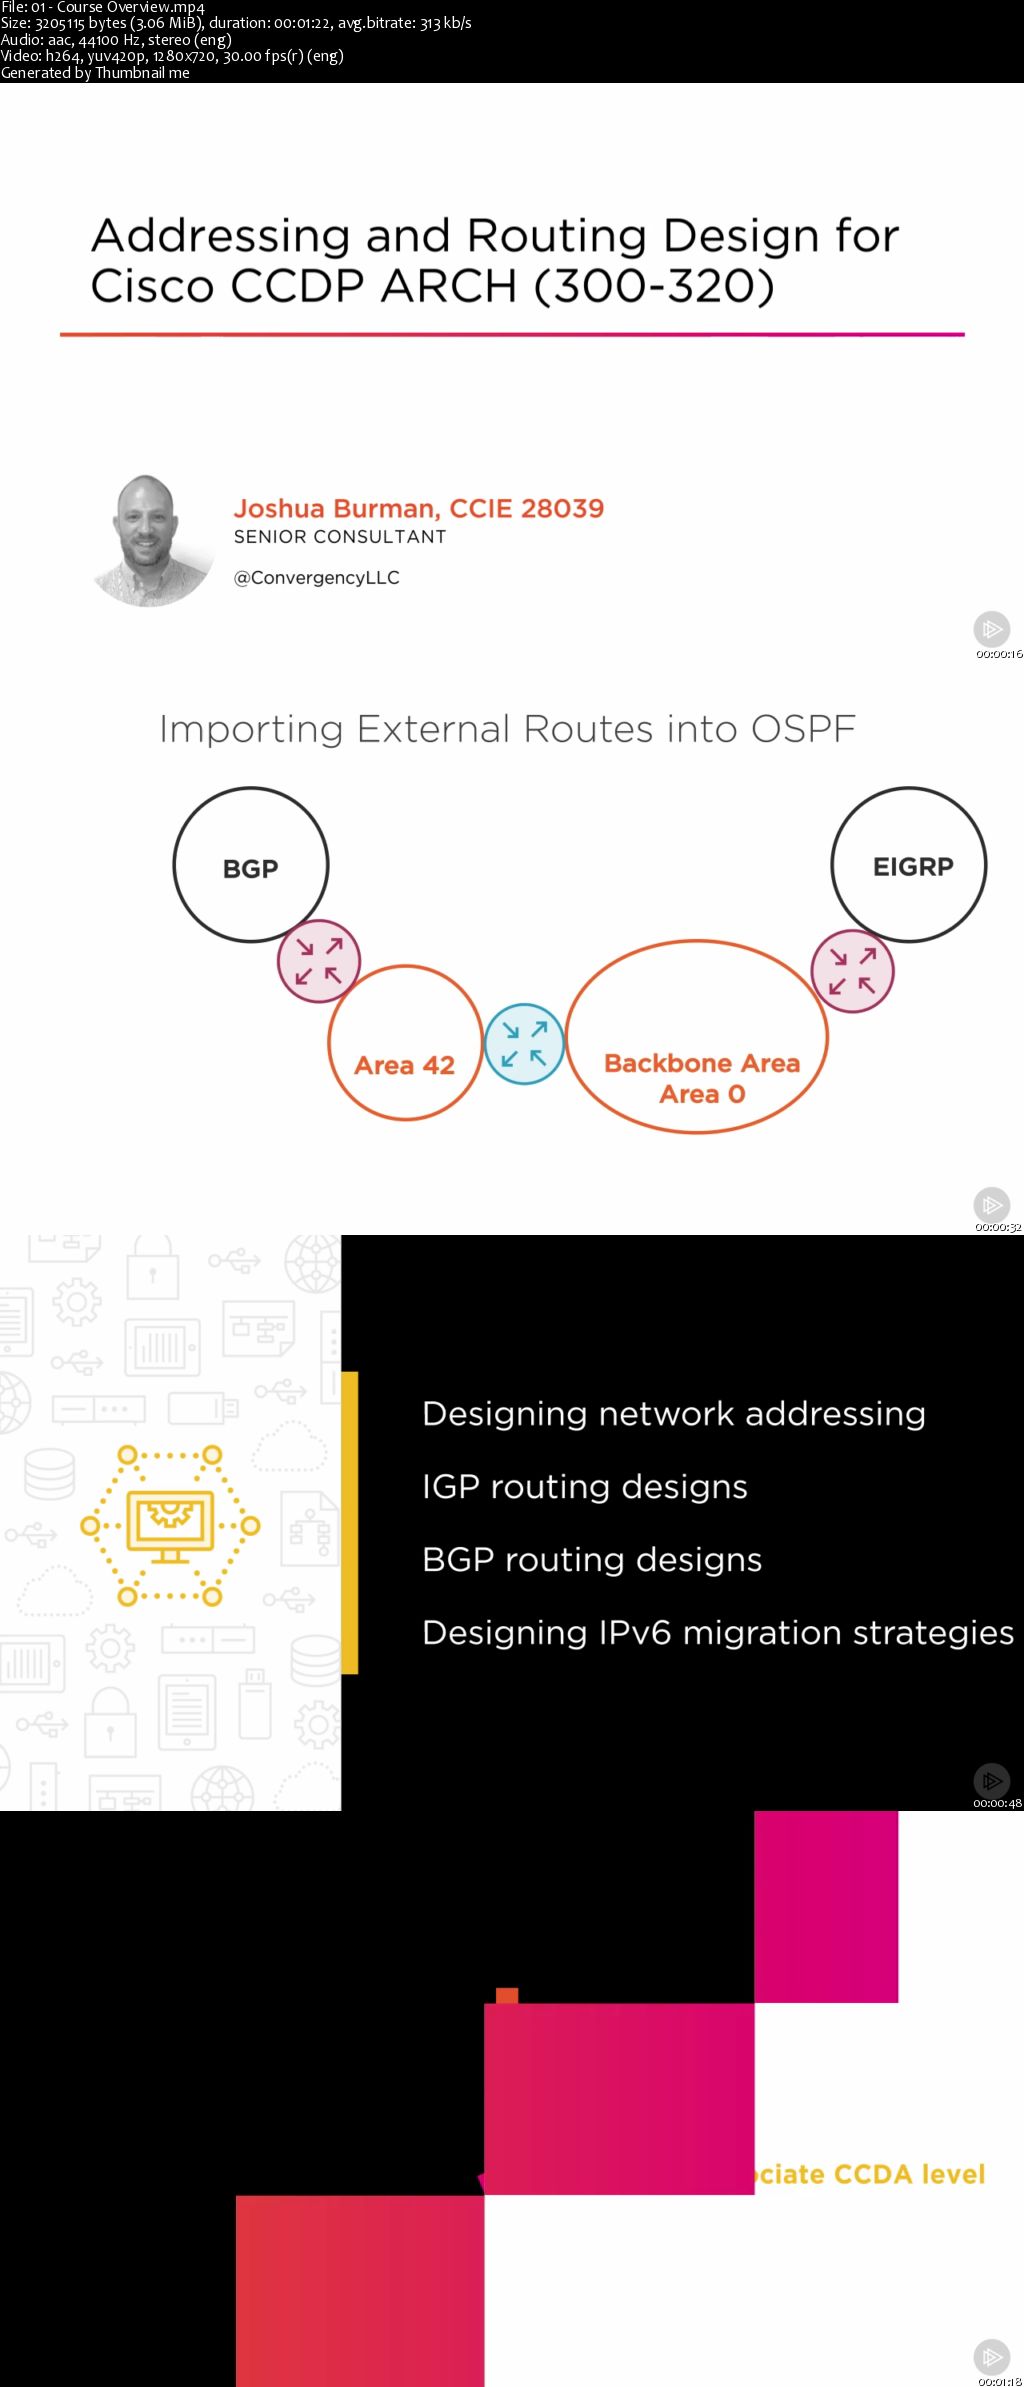 Addressing and Routing Design for Cisco CCDP ARCH (300-320)